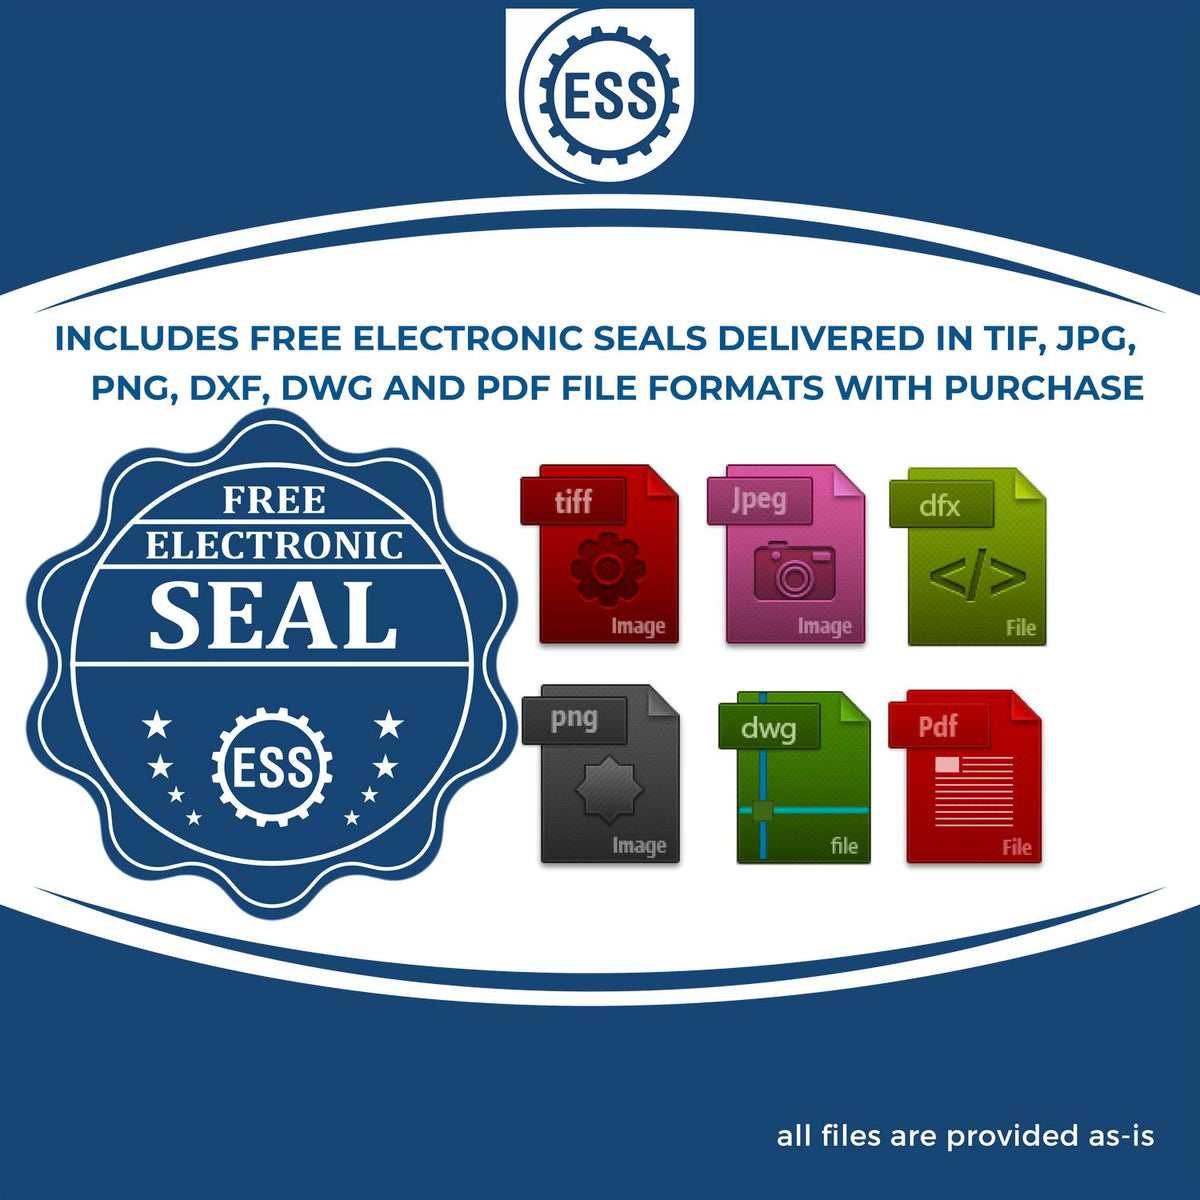 An infographic for the free electronic seal for the Premium MaxLight Pre-Inked New Jersey Landscape Architectural Stamp illustrating the different file type icons such as DXF, DWG, TIF, JPG and PNG.